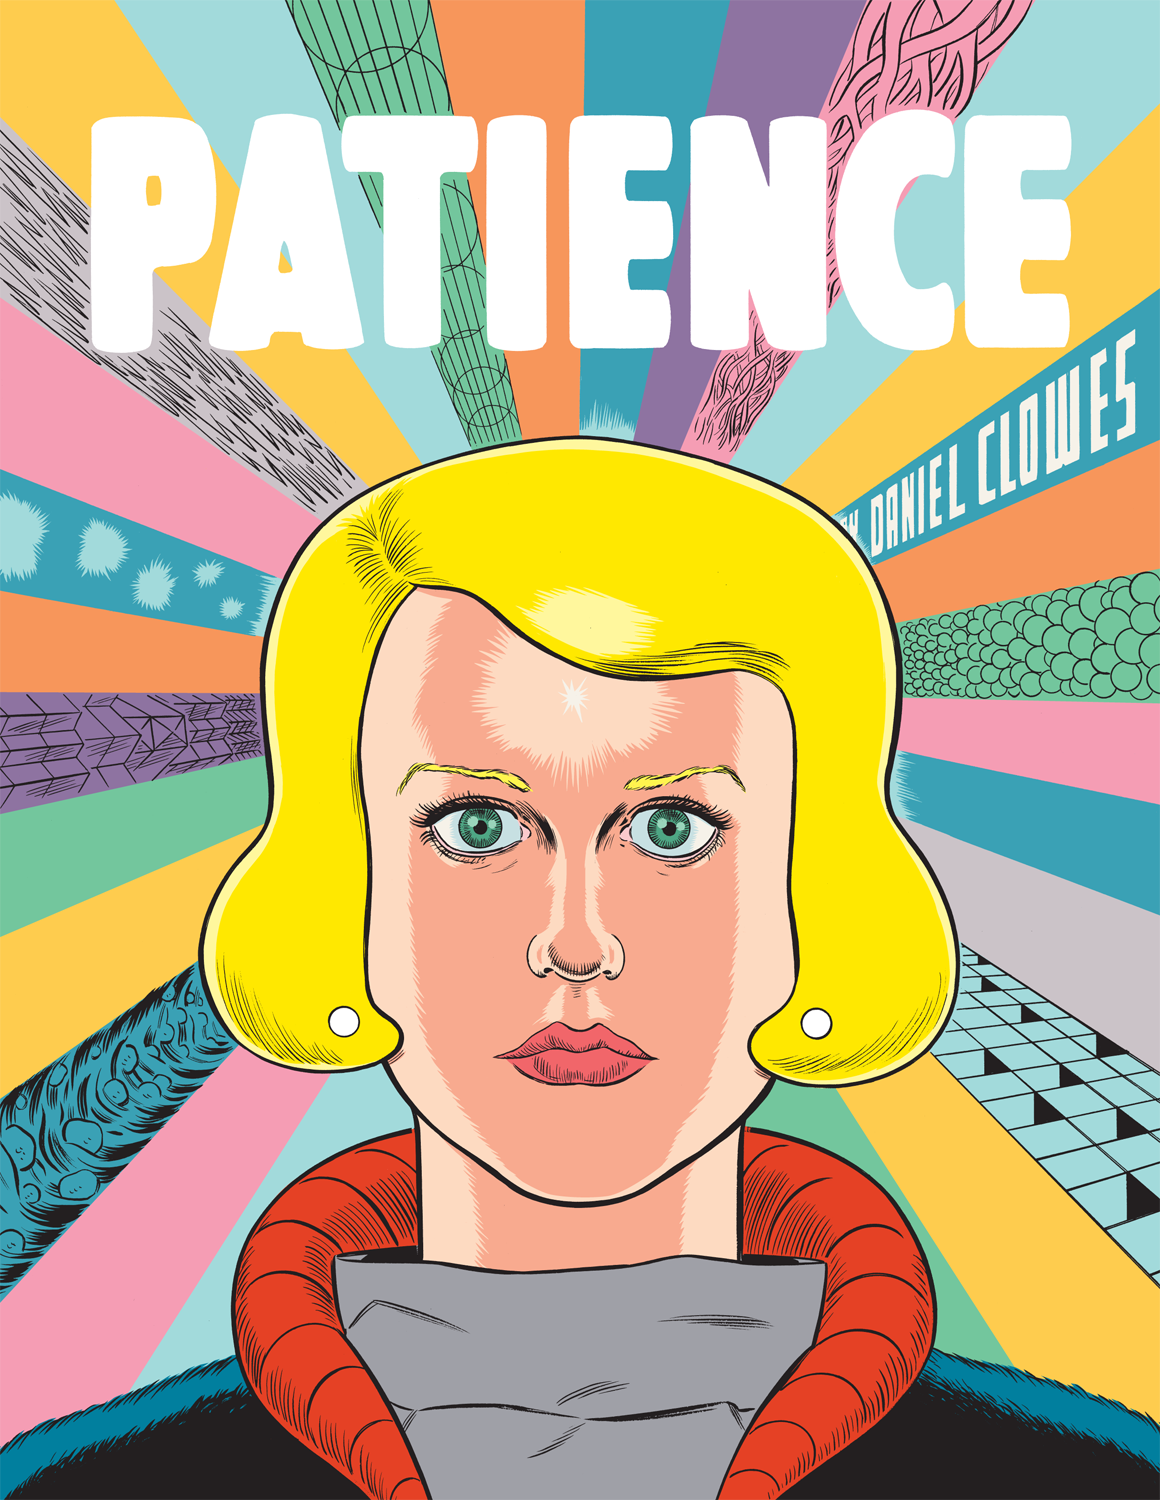 Review of “Patience” by Daniel Clowes